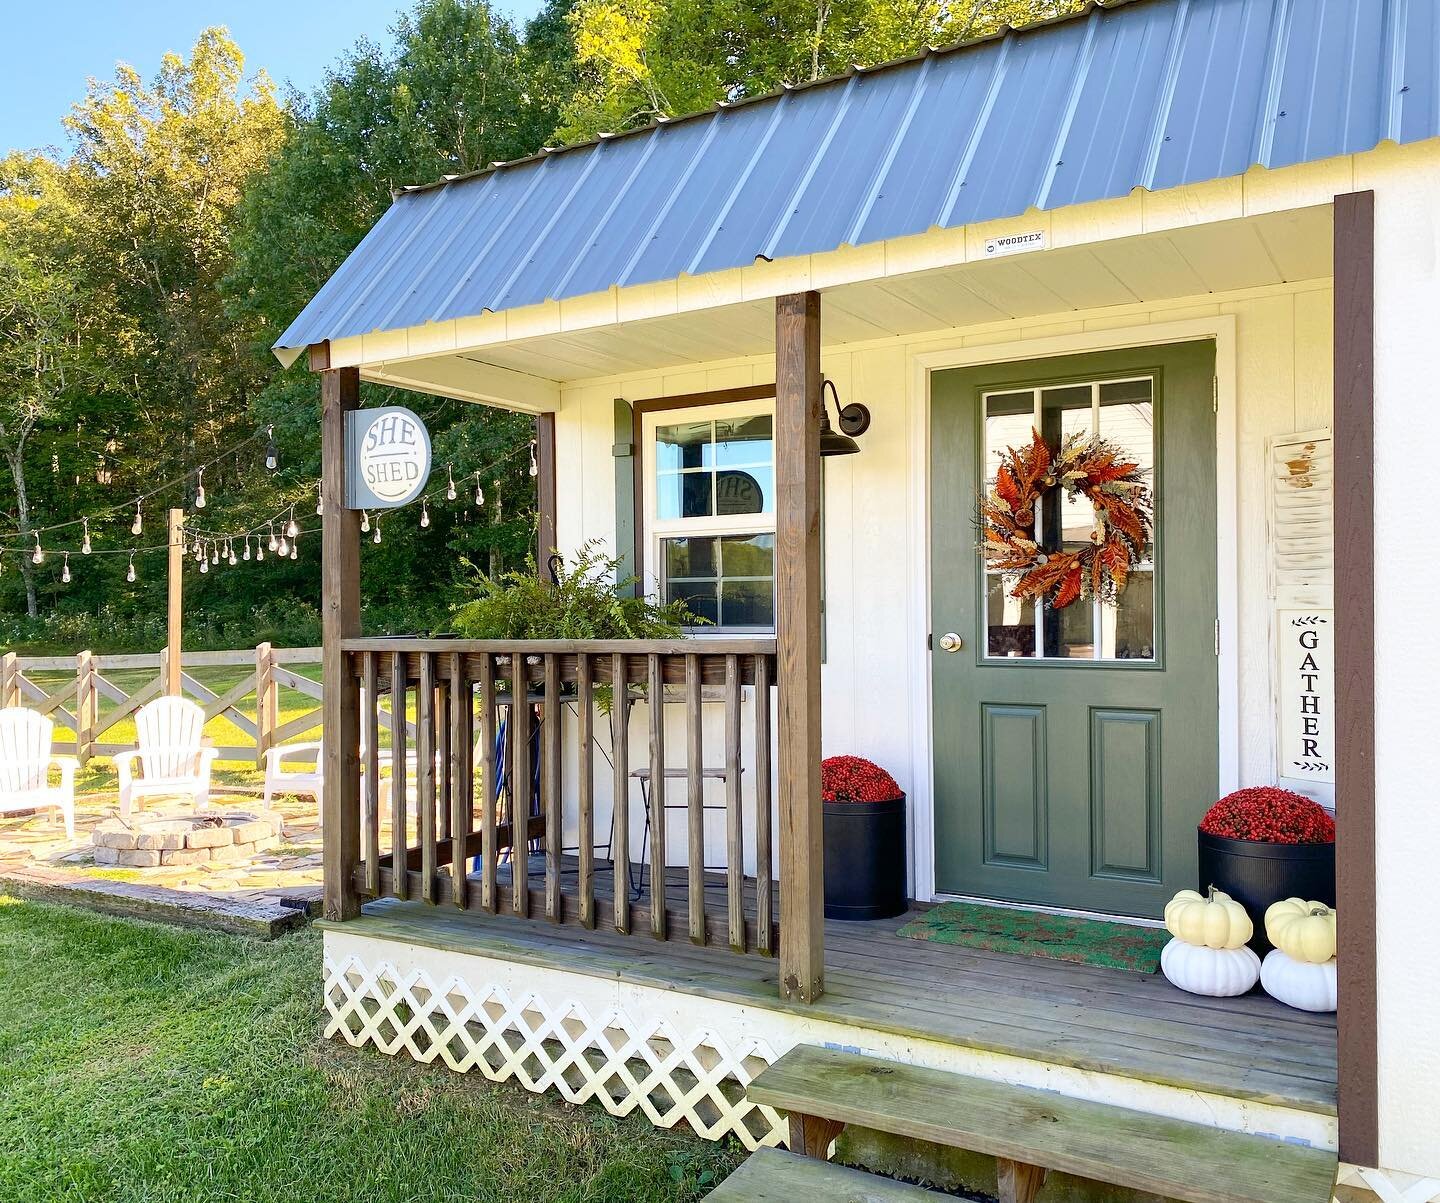 Join me mid-morning over @antiquefarmhouse as I take over their feed to share a little bit about myself,  our home, our family, and this little #sheshed @Antiquefarmhouse has been a huge support to me over the years, and I can&rsquo;t wait to show yo